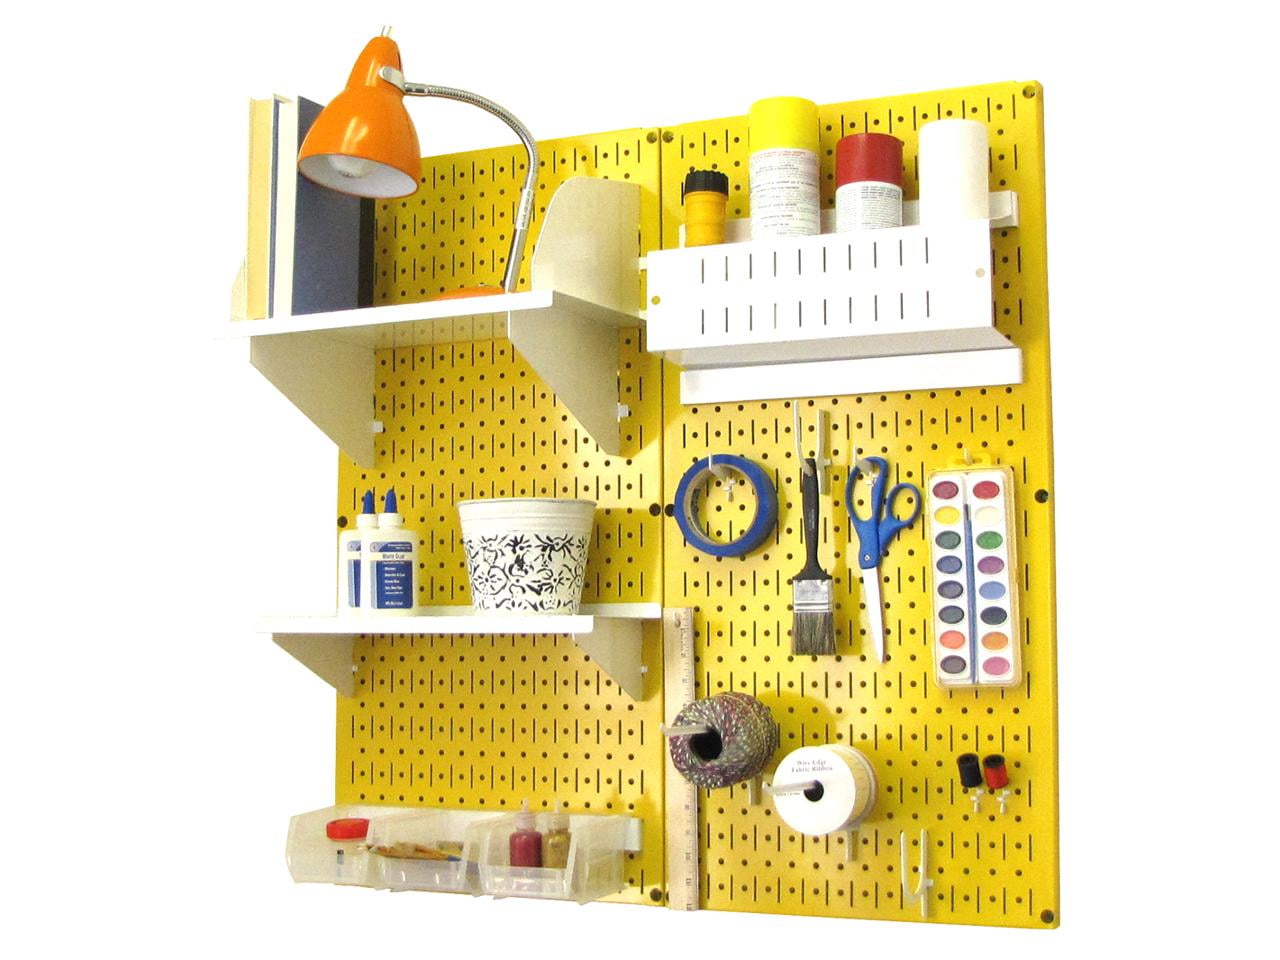 Wall Control Hobby Craft Pegboard Organizer Storage Kit; Yellow and White